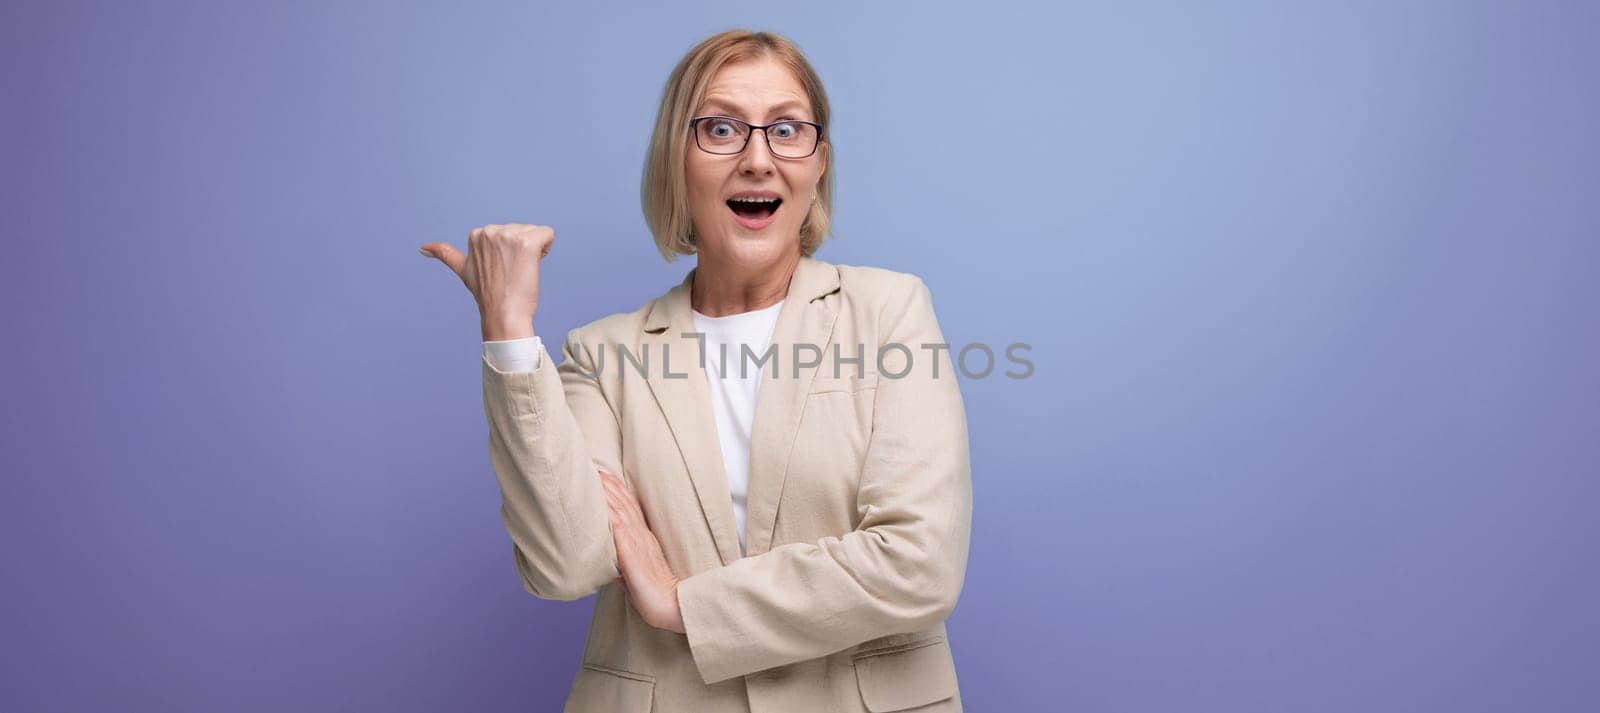 middle-aged business woman smiling in a jacket on a bright studio background with copy space.